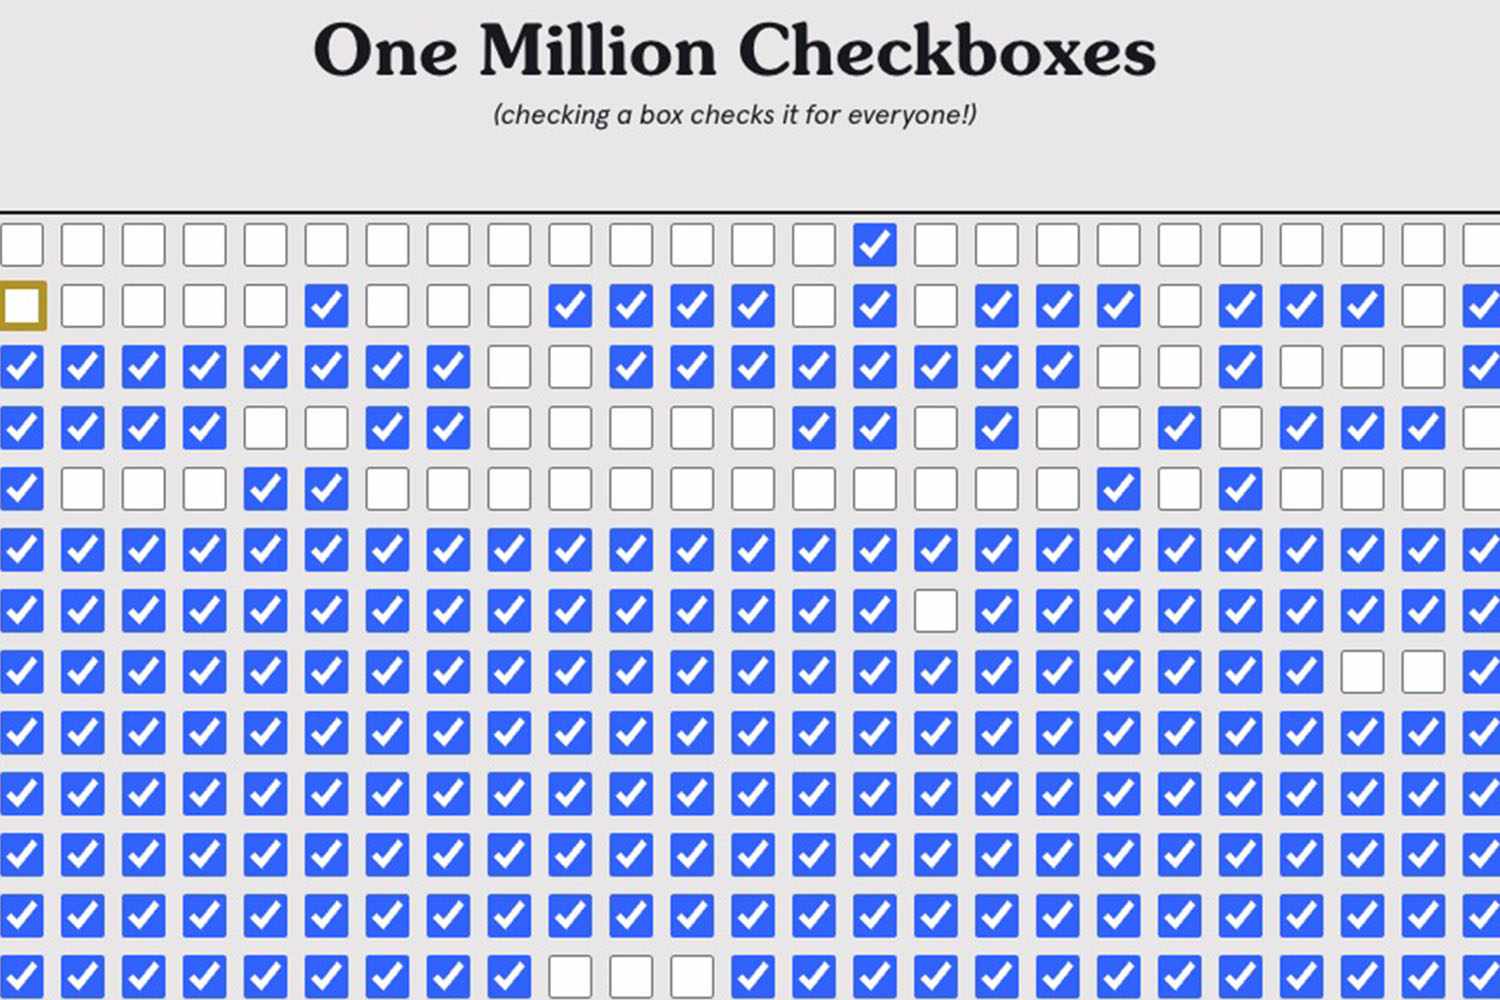 One Million Checkboxes Creator Dubs It 'Dumbest Website of All Time' – and Proof the Internet Can Still Be Fun